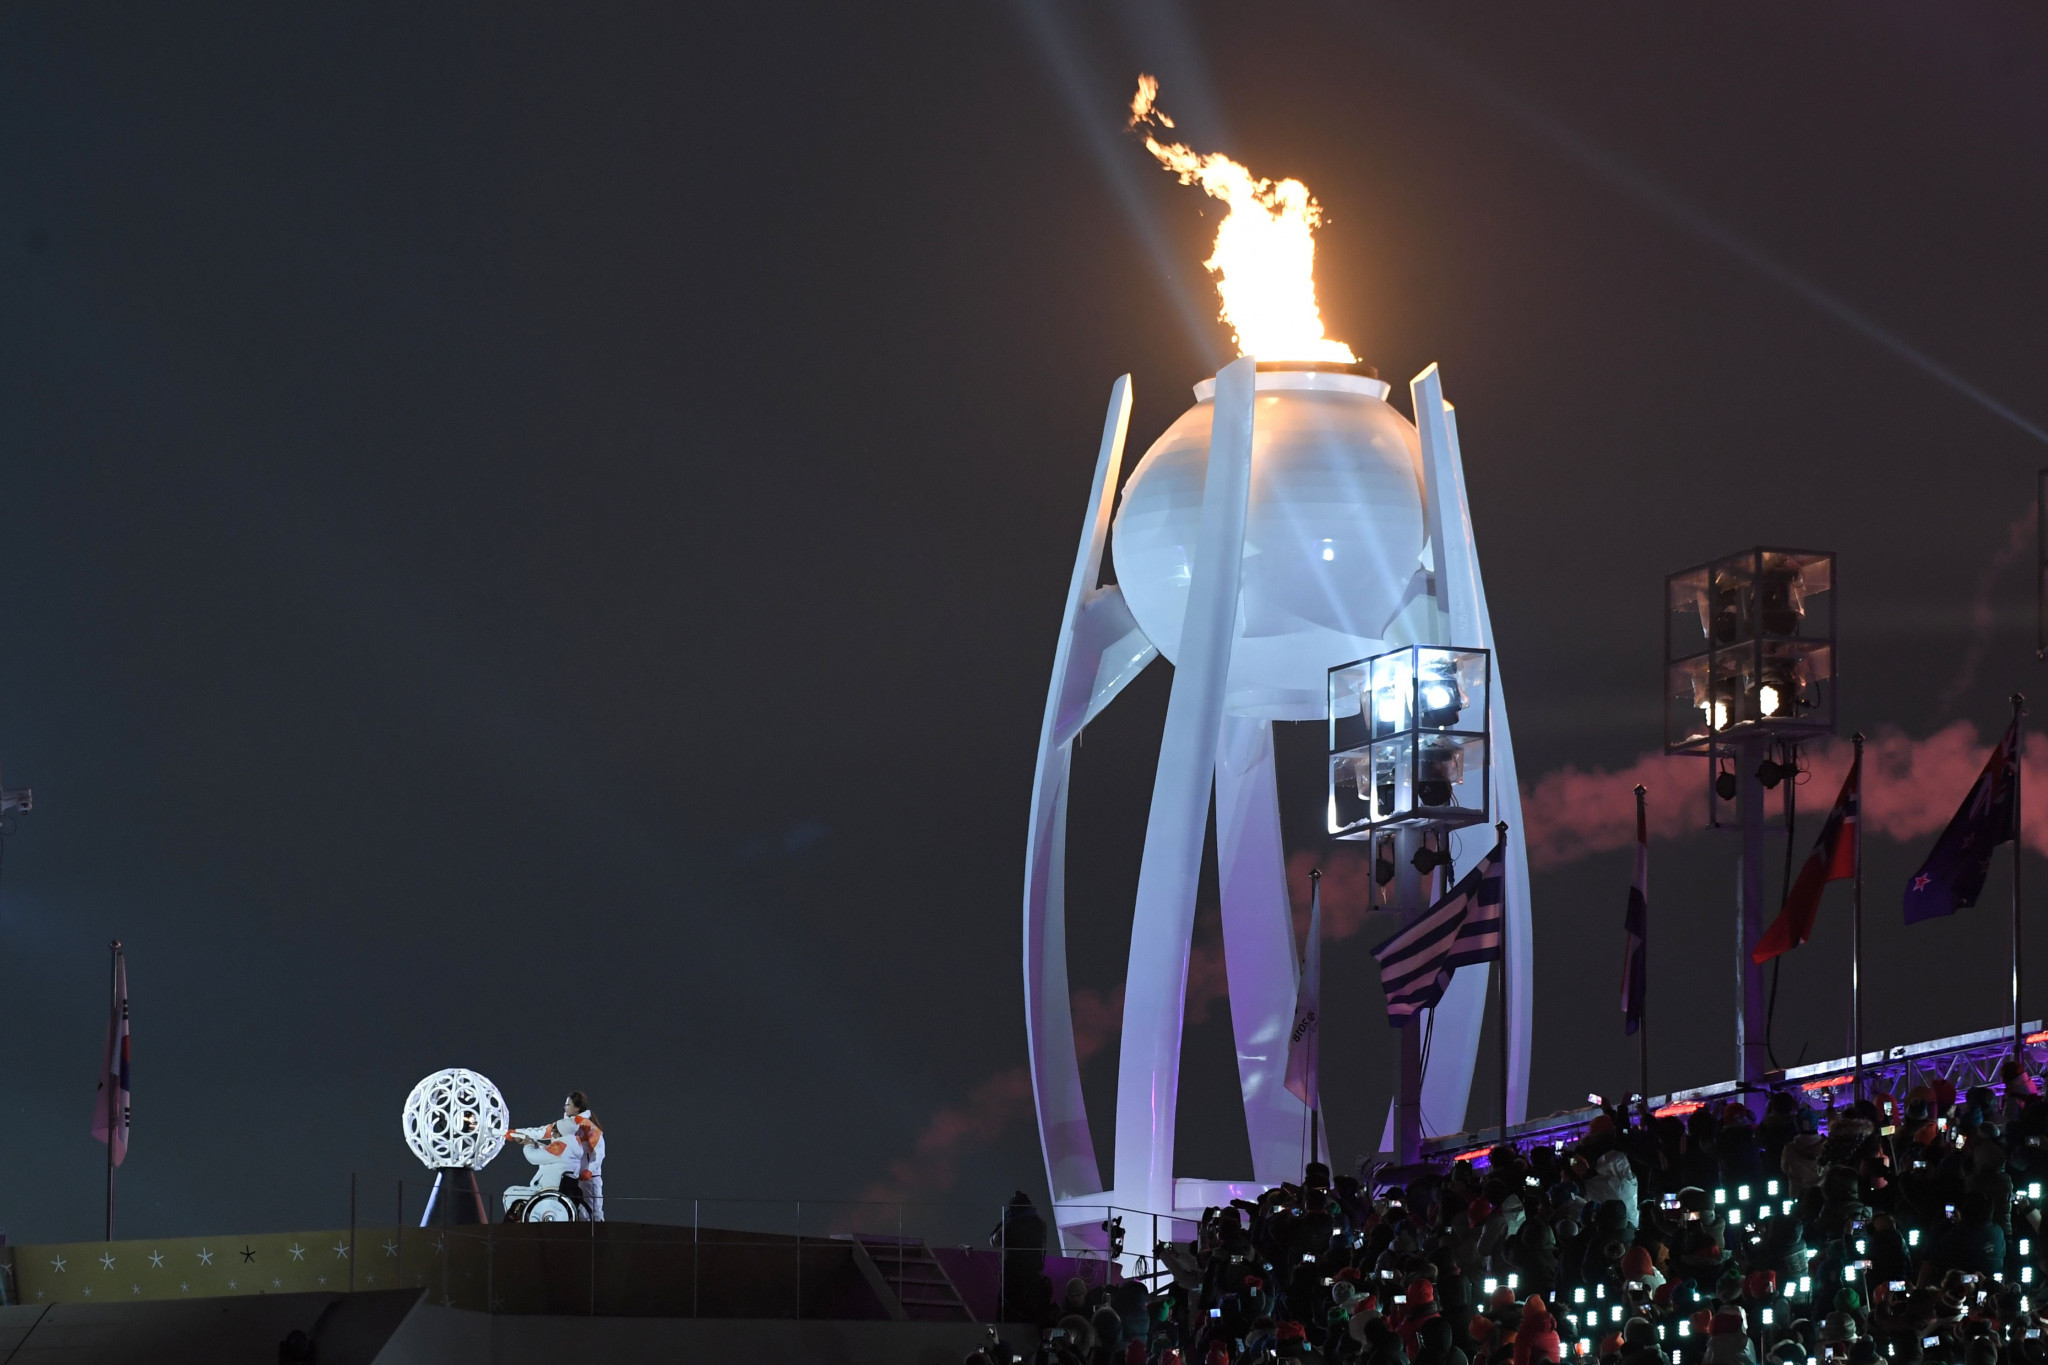 insidethegames is reporting LIVE from the Winter Paralympics in Pyeongchang